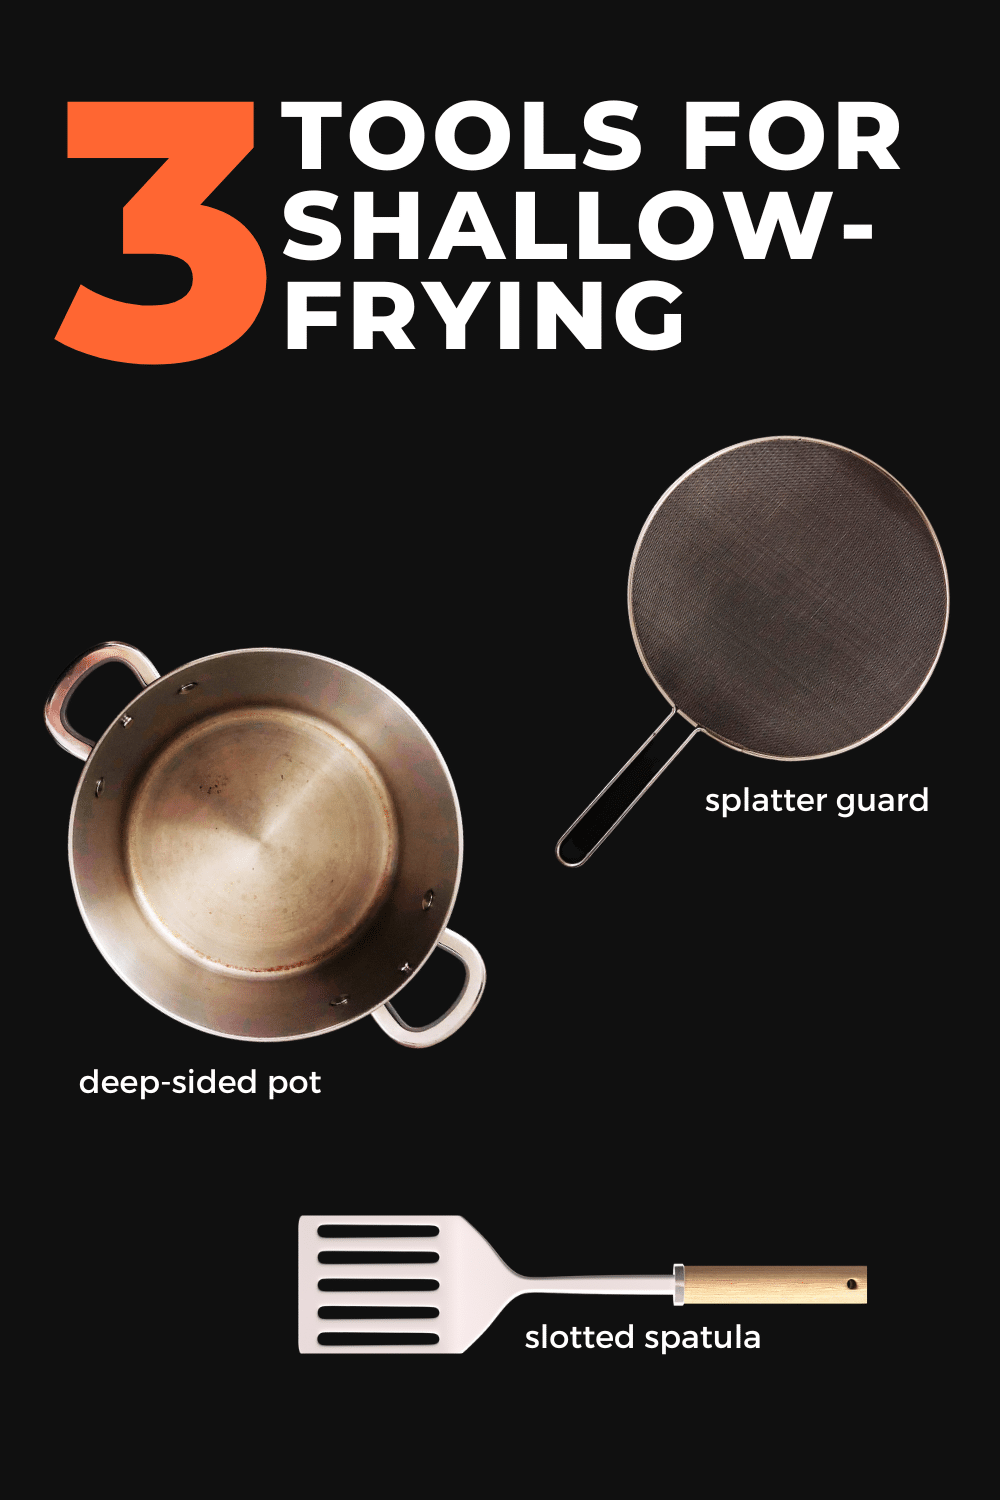 Graphic: 3 Tools for Shallow-Frying: A splatter guard for the pot, a deep-sided pot, a slotted spatula